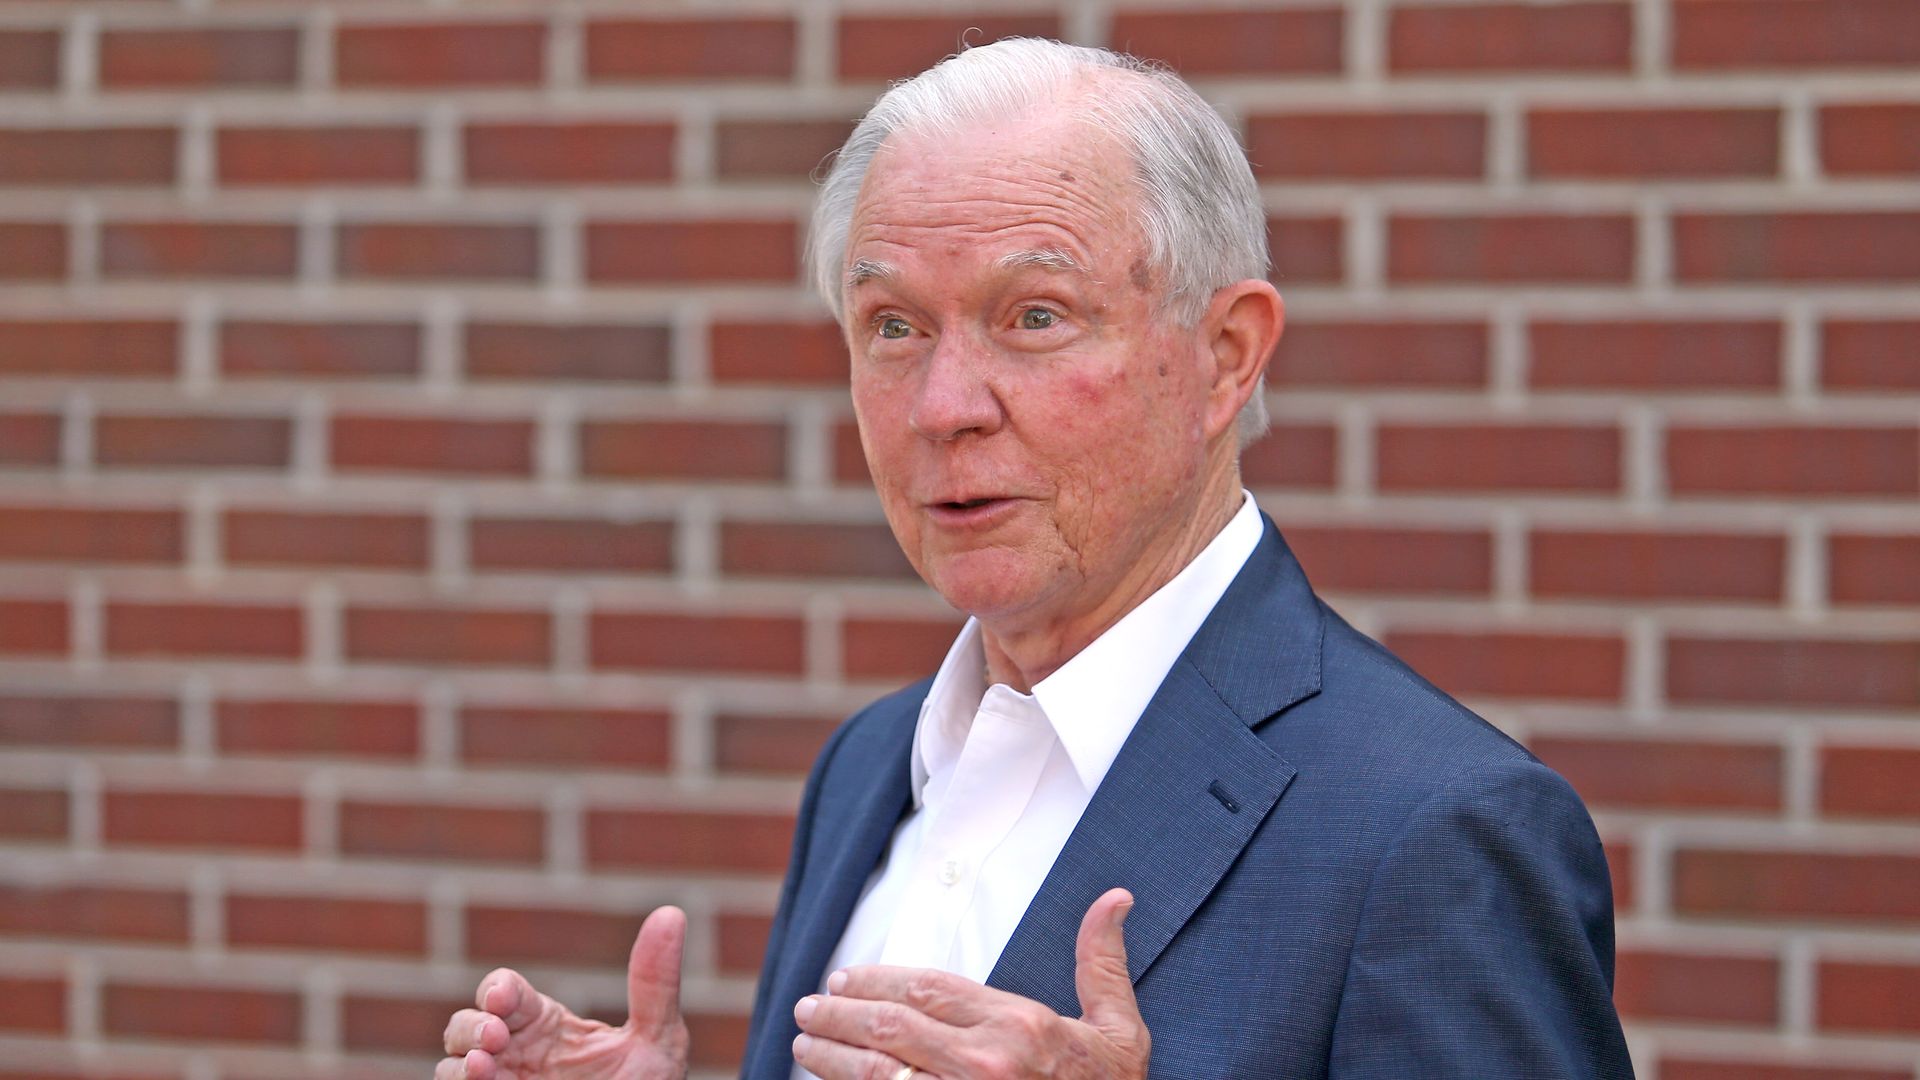 Jeff Sessions addresses the media after voting in the Alabama Republican primary runoff